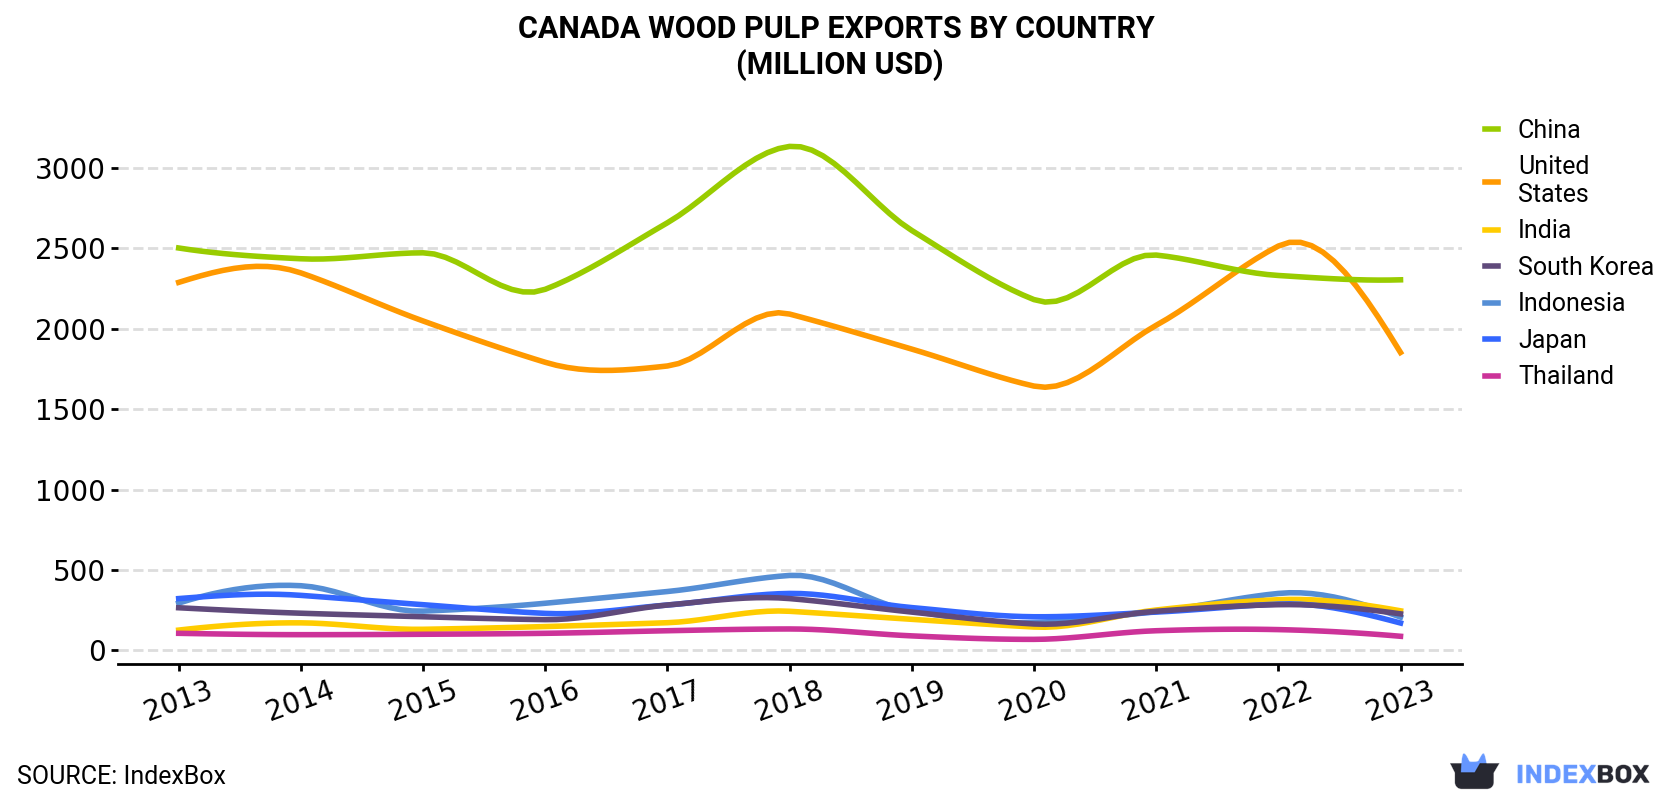 Canada Wood Pulp Exports By Country (Million USD)